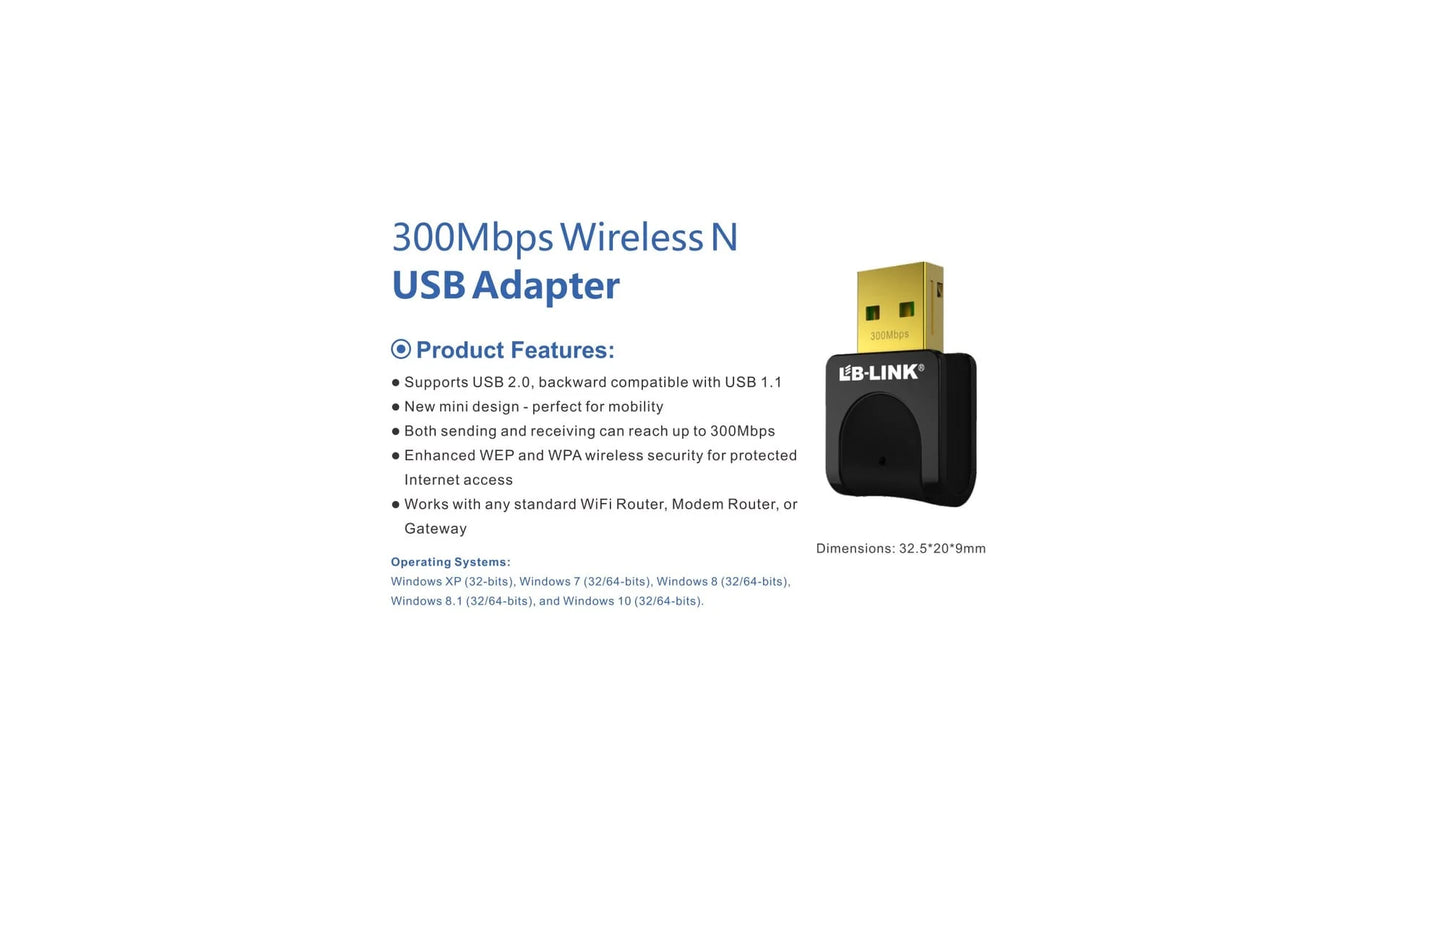 LB-LINK Wireless N USB Adapter BL-WN351 300Mbps